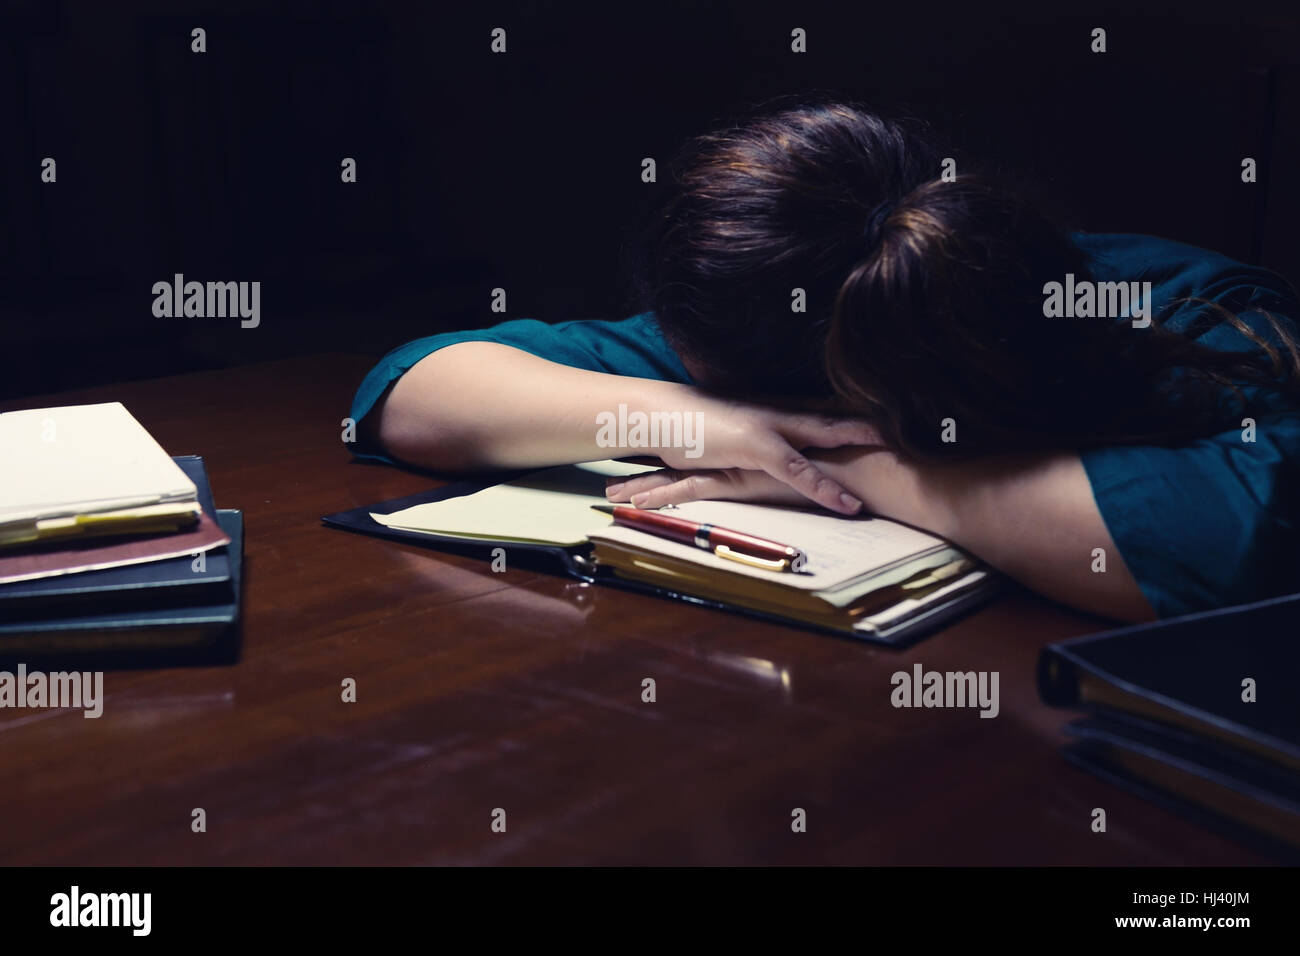 Tired young lady sleeping on her books Stock Photo